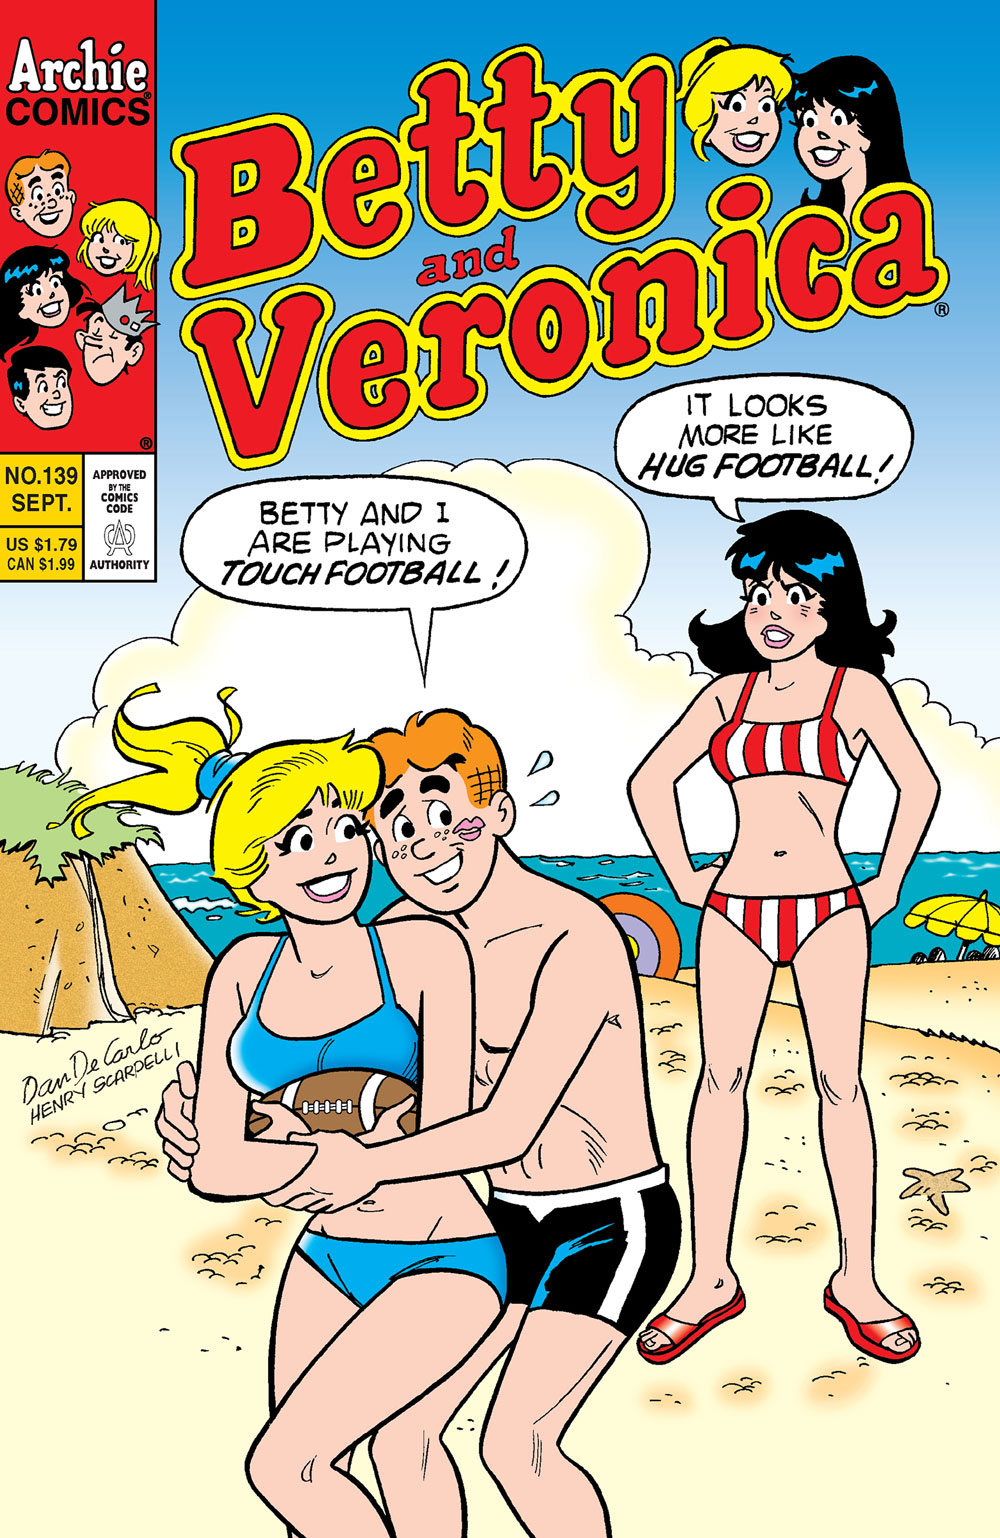 Betty and Archie play touch football on the beatch. Veronica looks on angrily and says it looks more like hug football.